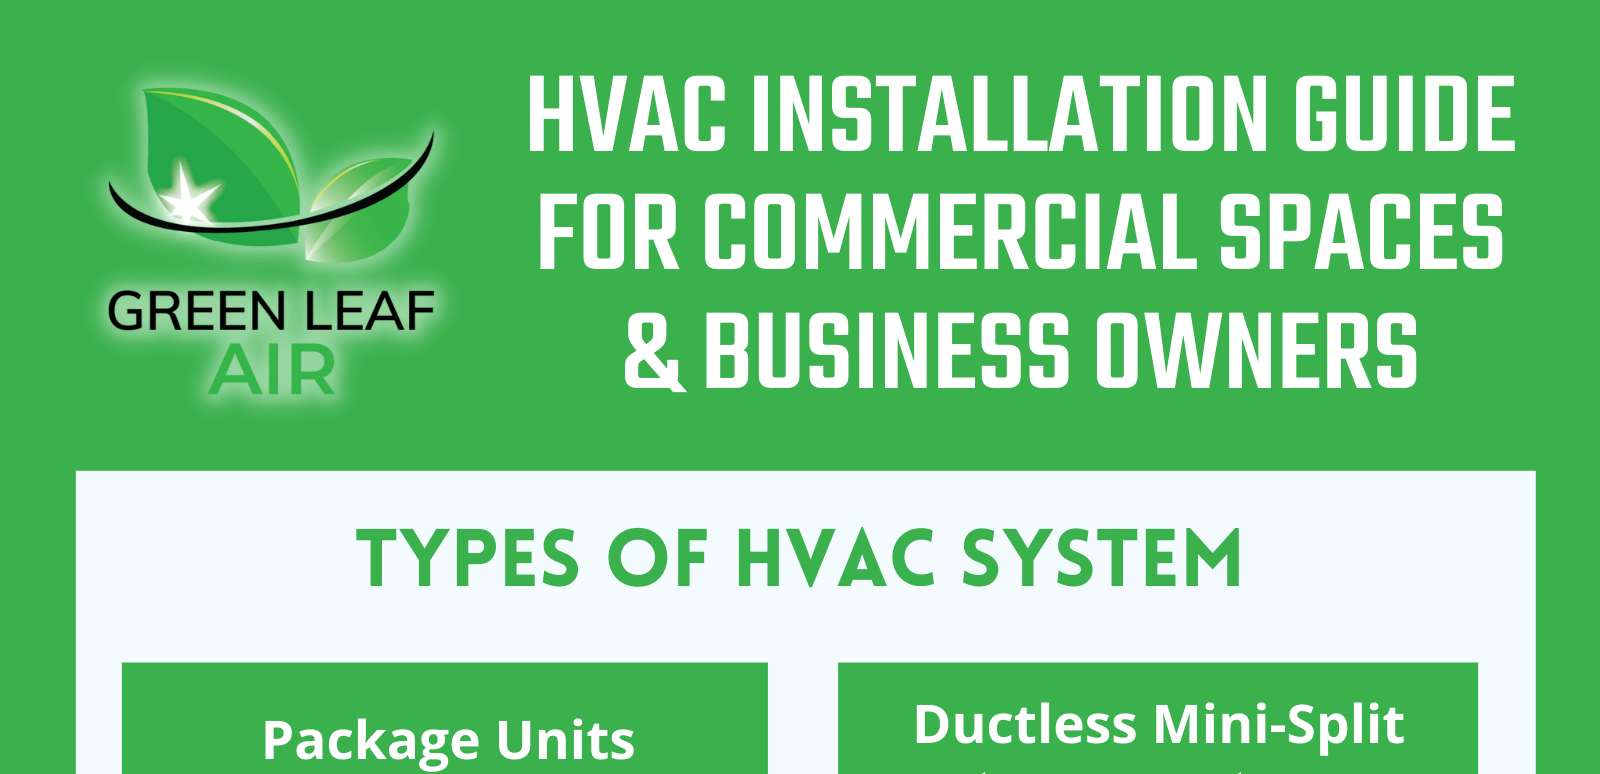 HVAC Installation Guide for Commercial Spaces & Business Owners